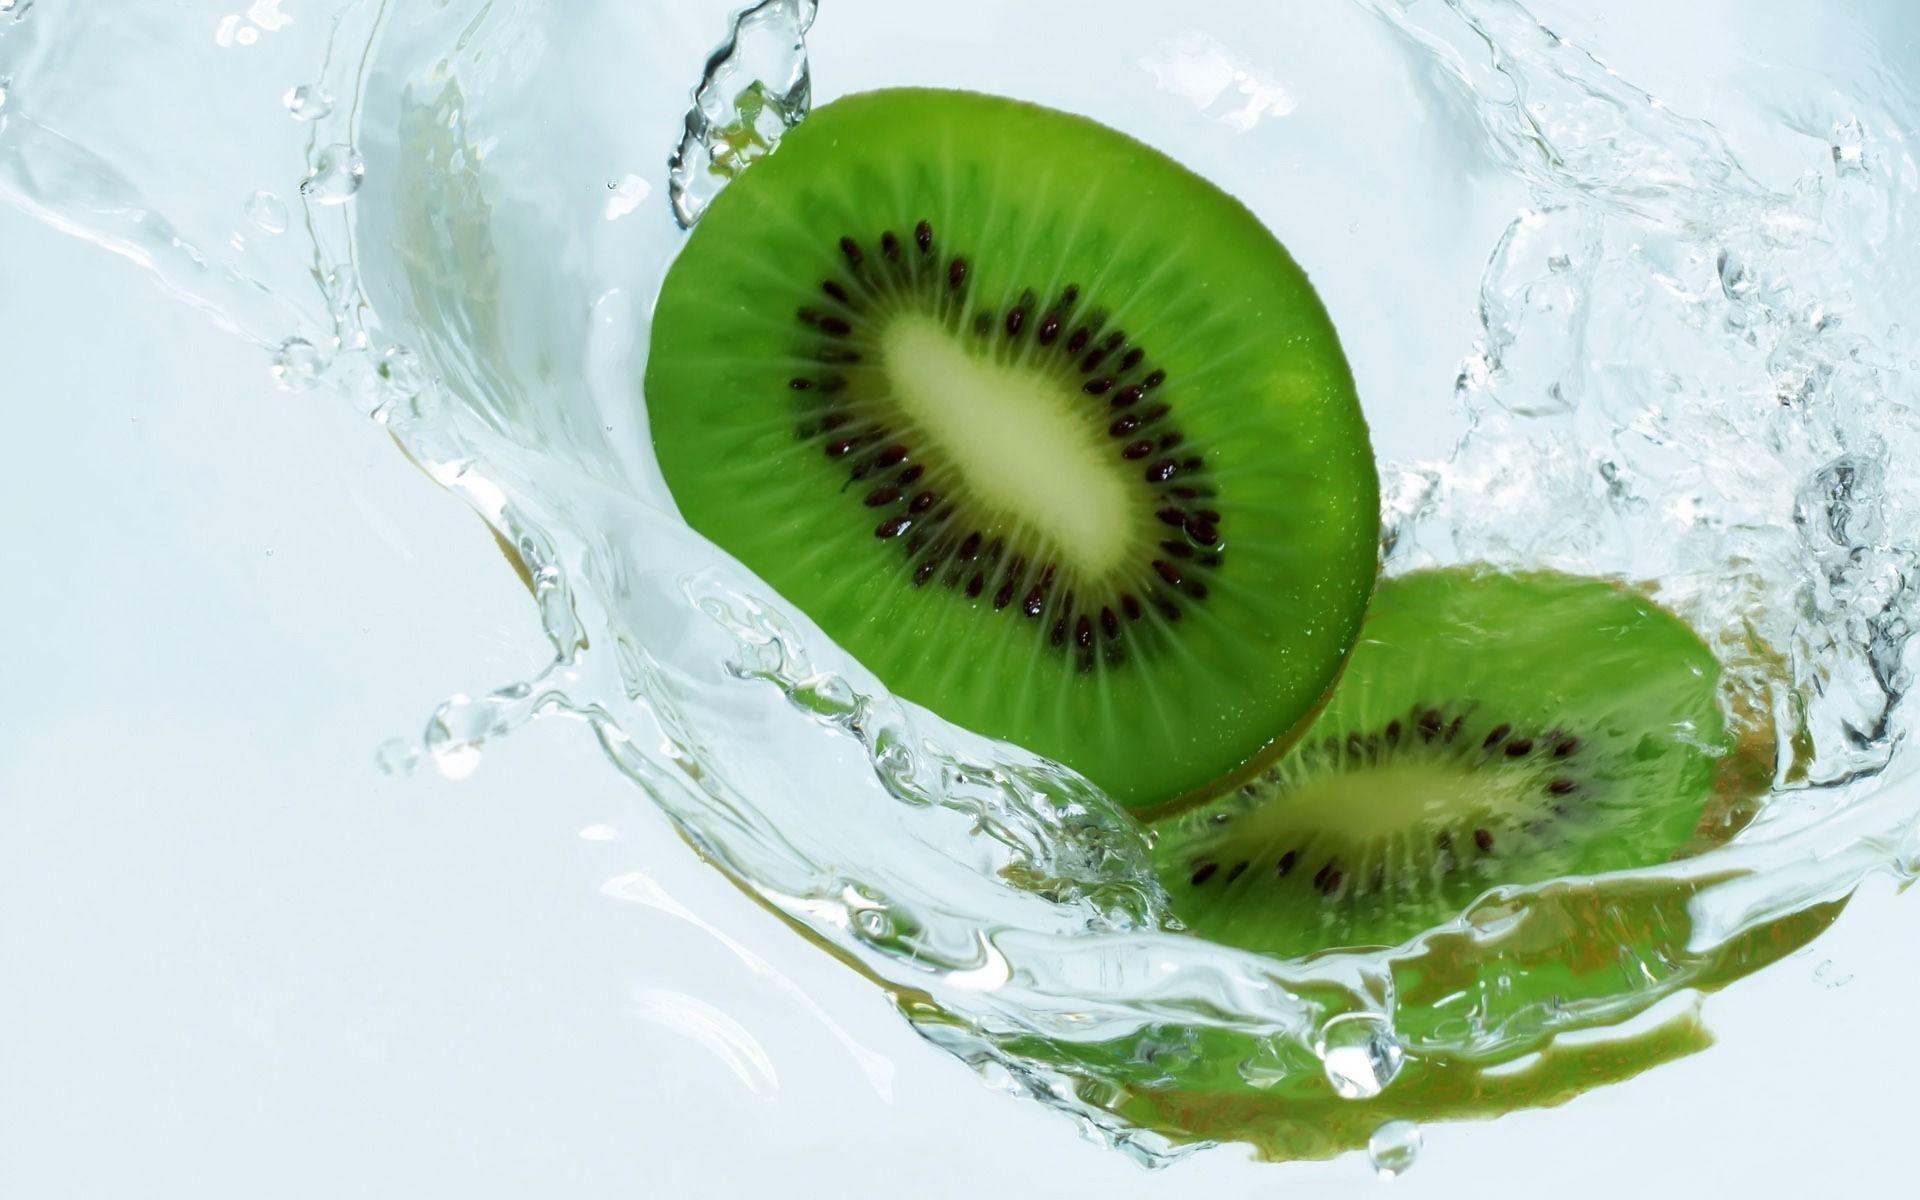 Kiwi Wallpaper Other Nature Wallpaper in jpg format for free download